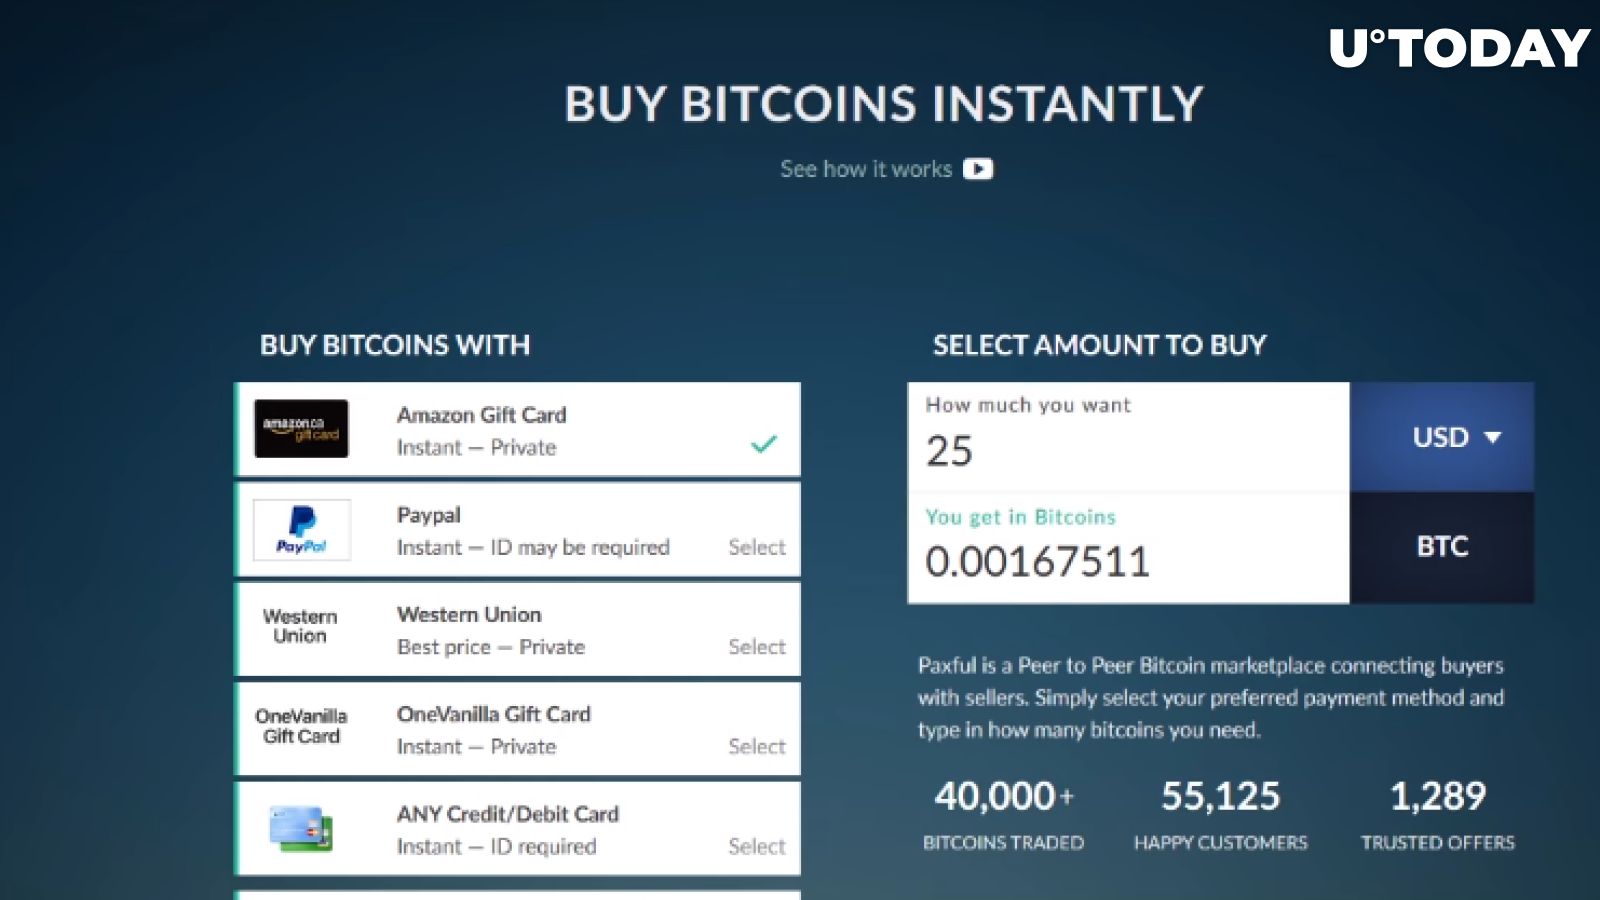 How to Accept Bitcoin Loads on Your Prepaid Card